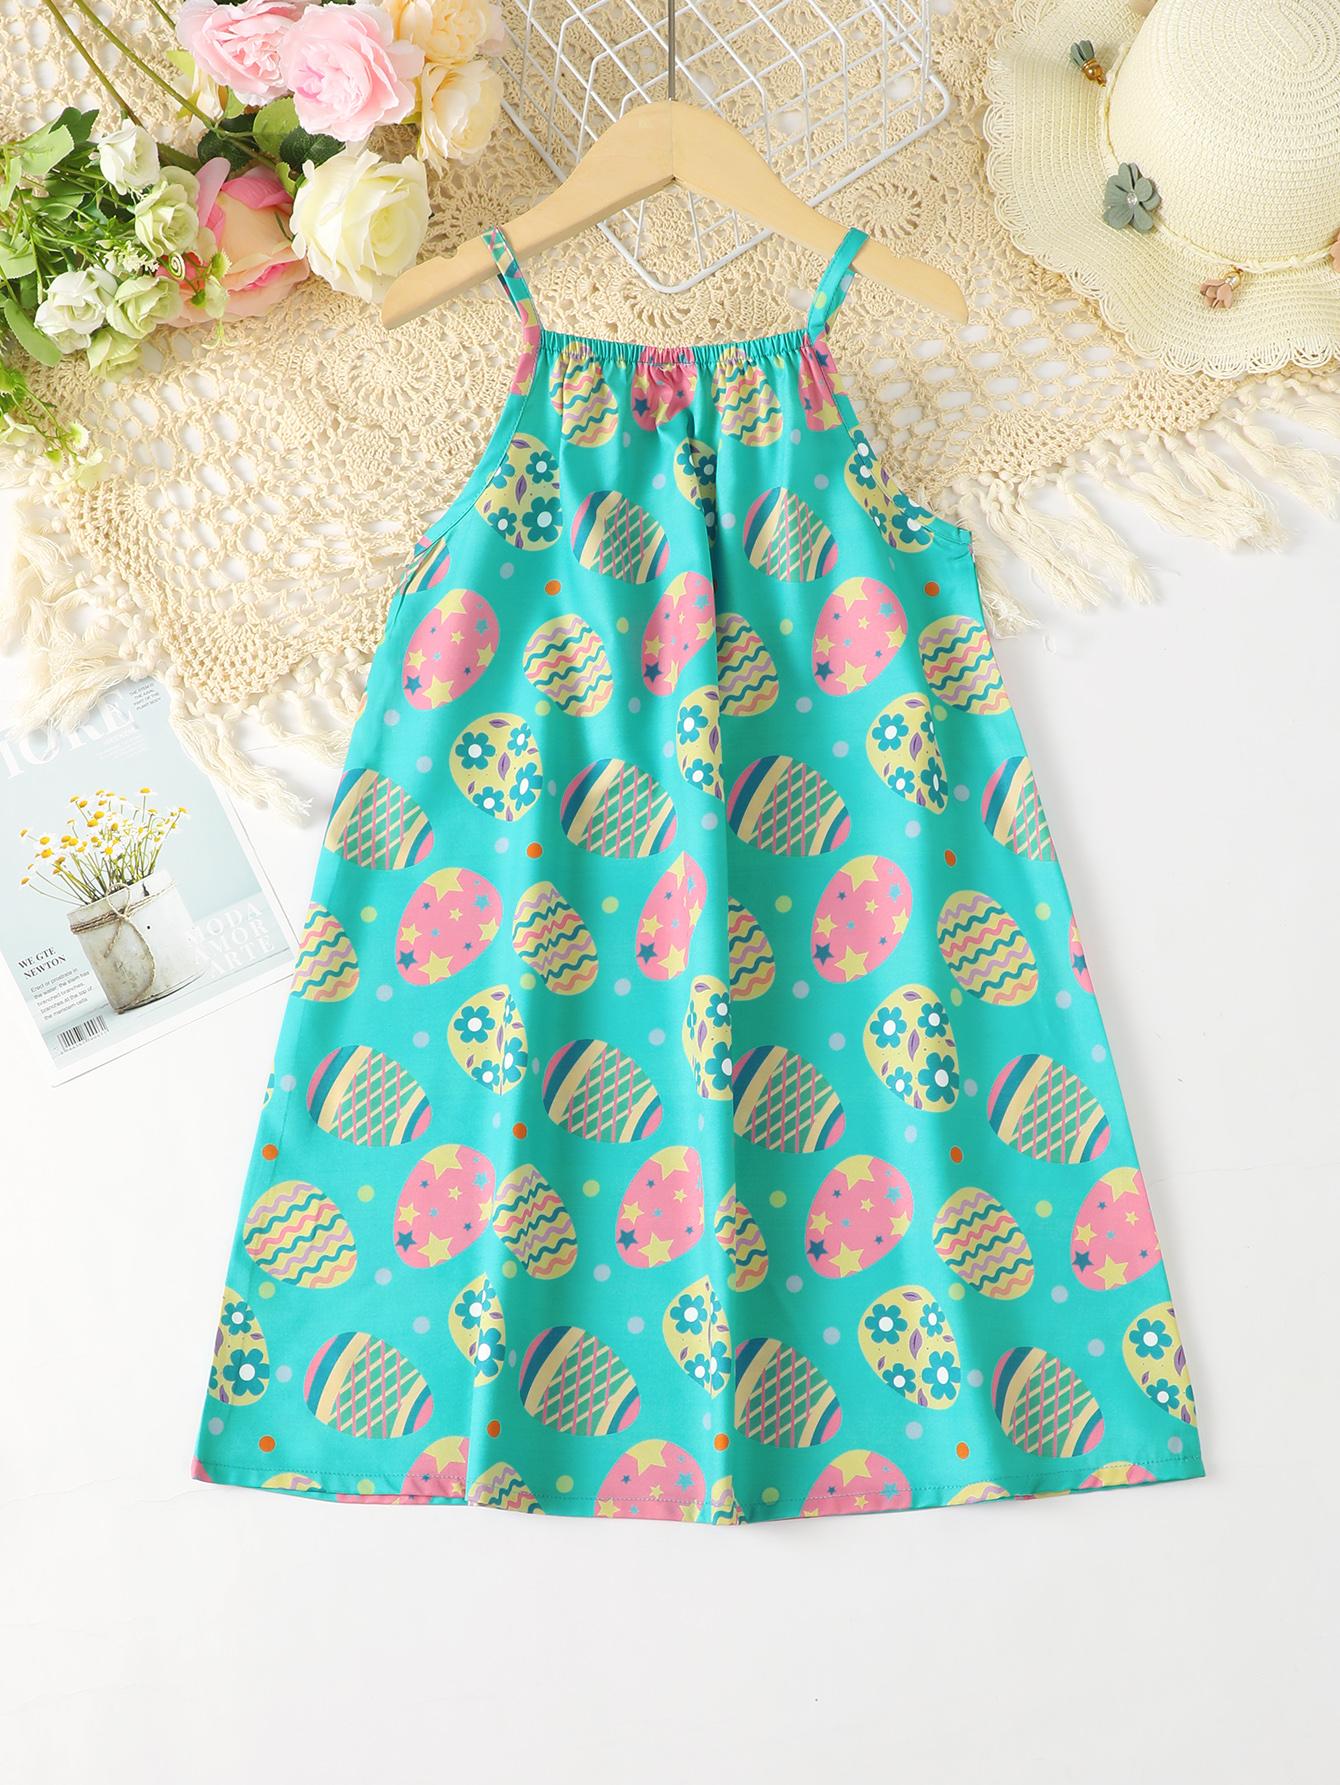 5-14Y Kids Fashion Ready Stock Big Girls Dress Easter Eggs Print Summer Straps Belt Dress One Piece Party Dress For Easter Green Catpapa 623020008